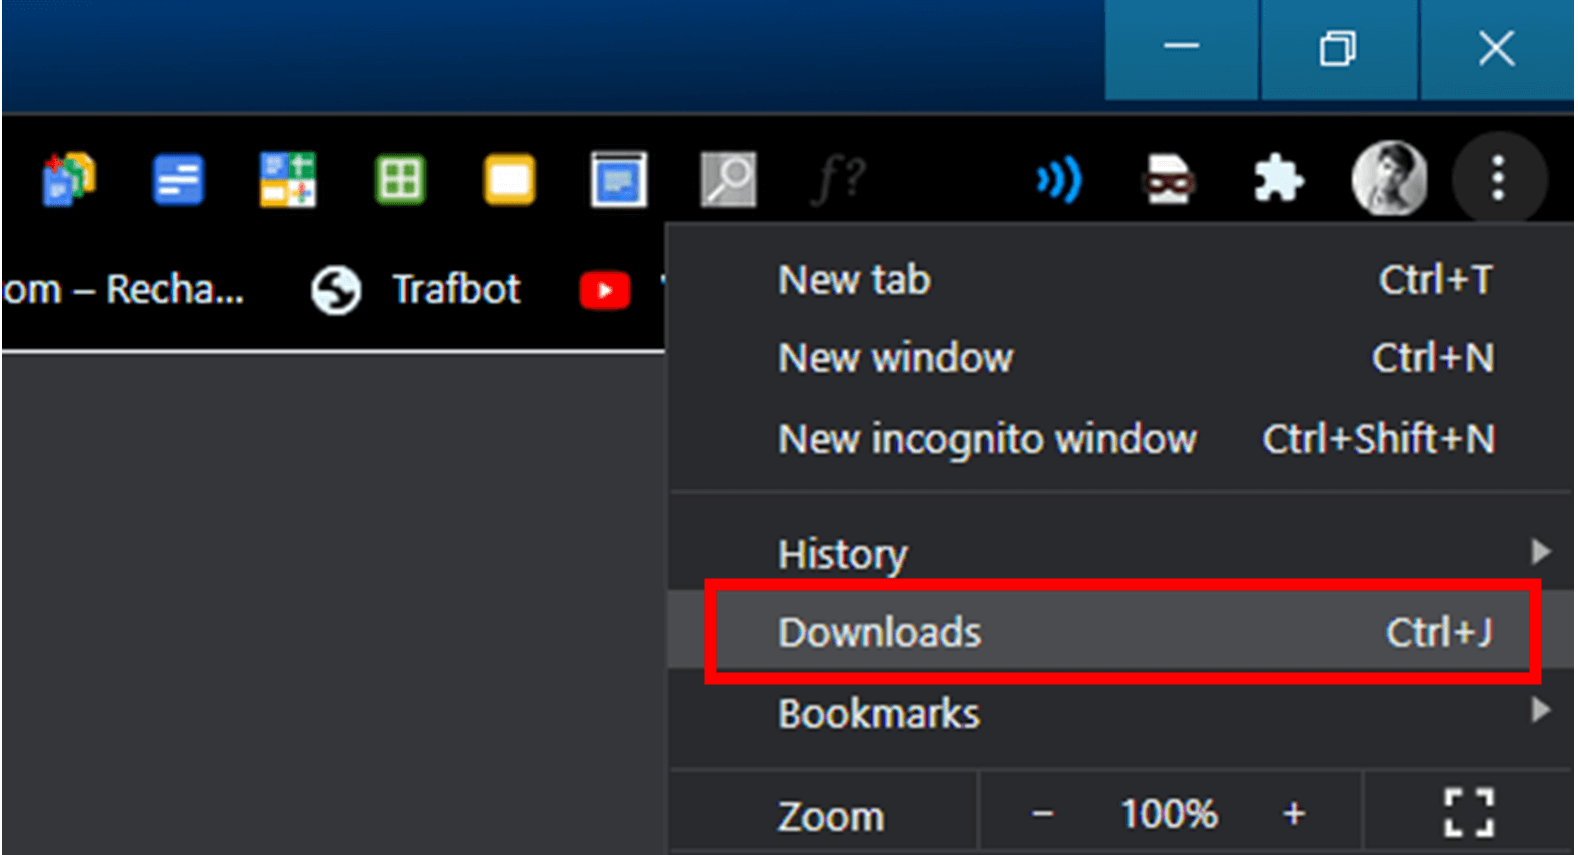 To open this Downloads section from the menu